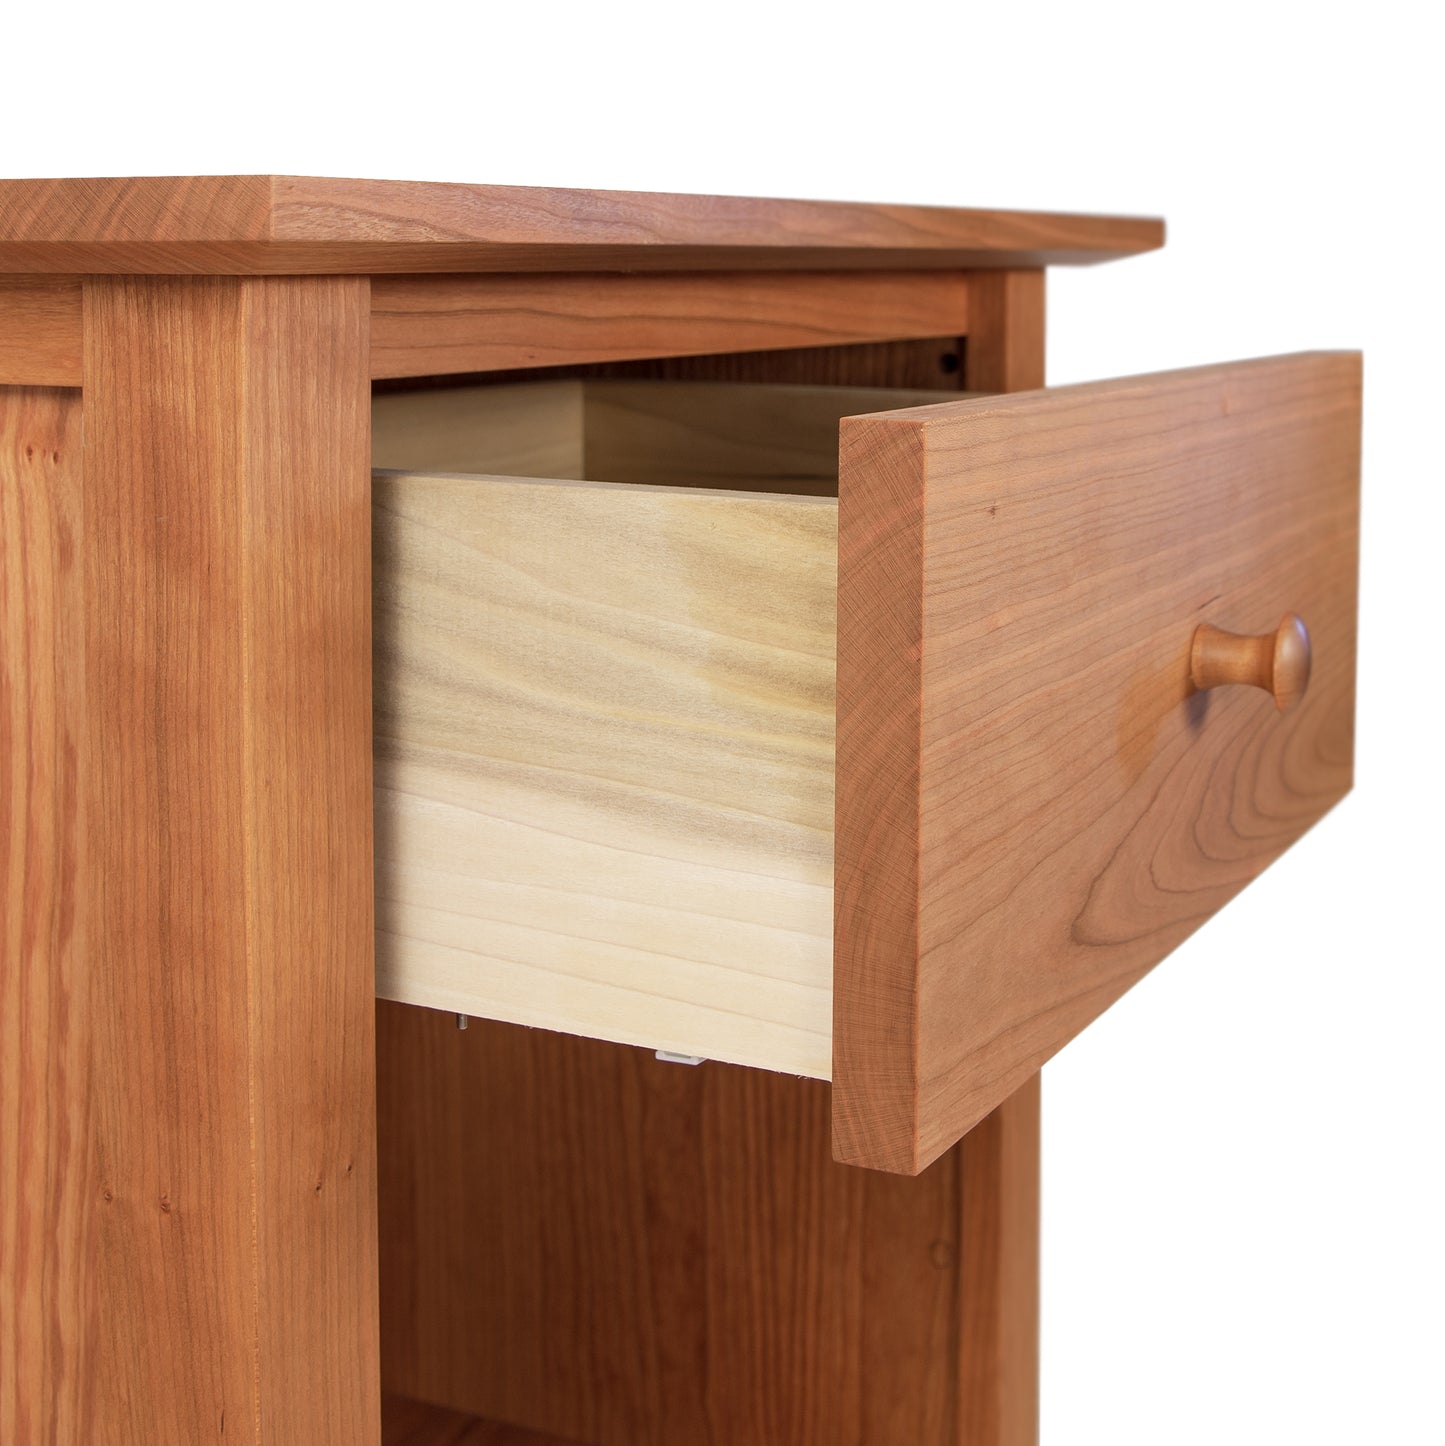 A Maple Corner Woodworks American Shaker 1-Drawer Enclosed Shelf Nightstand with an open drawer showing the interior construction and grain pattern, isolated on a white background.